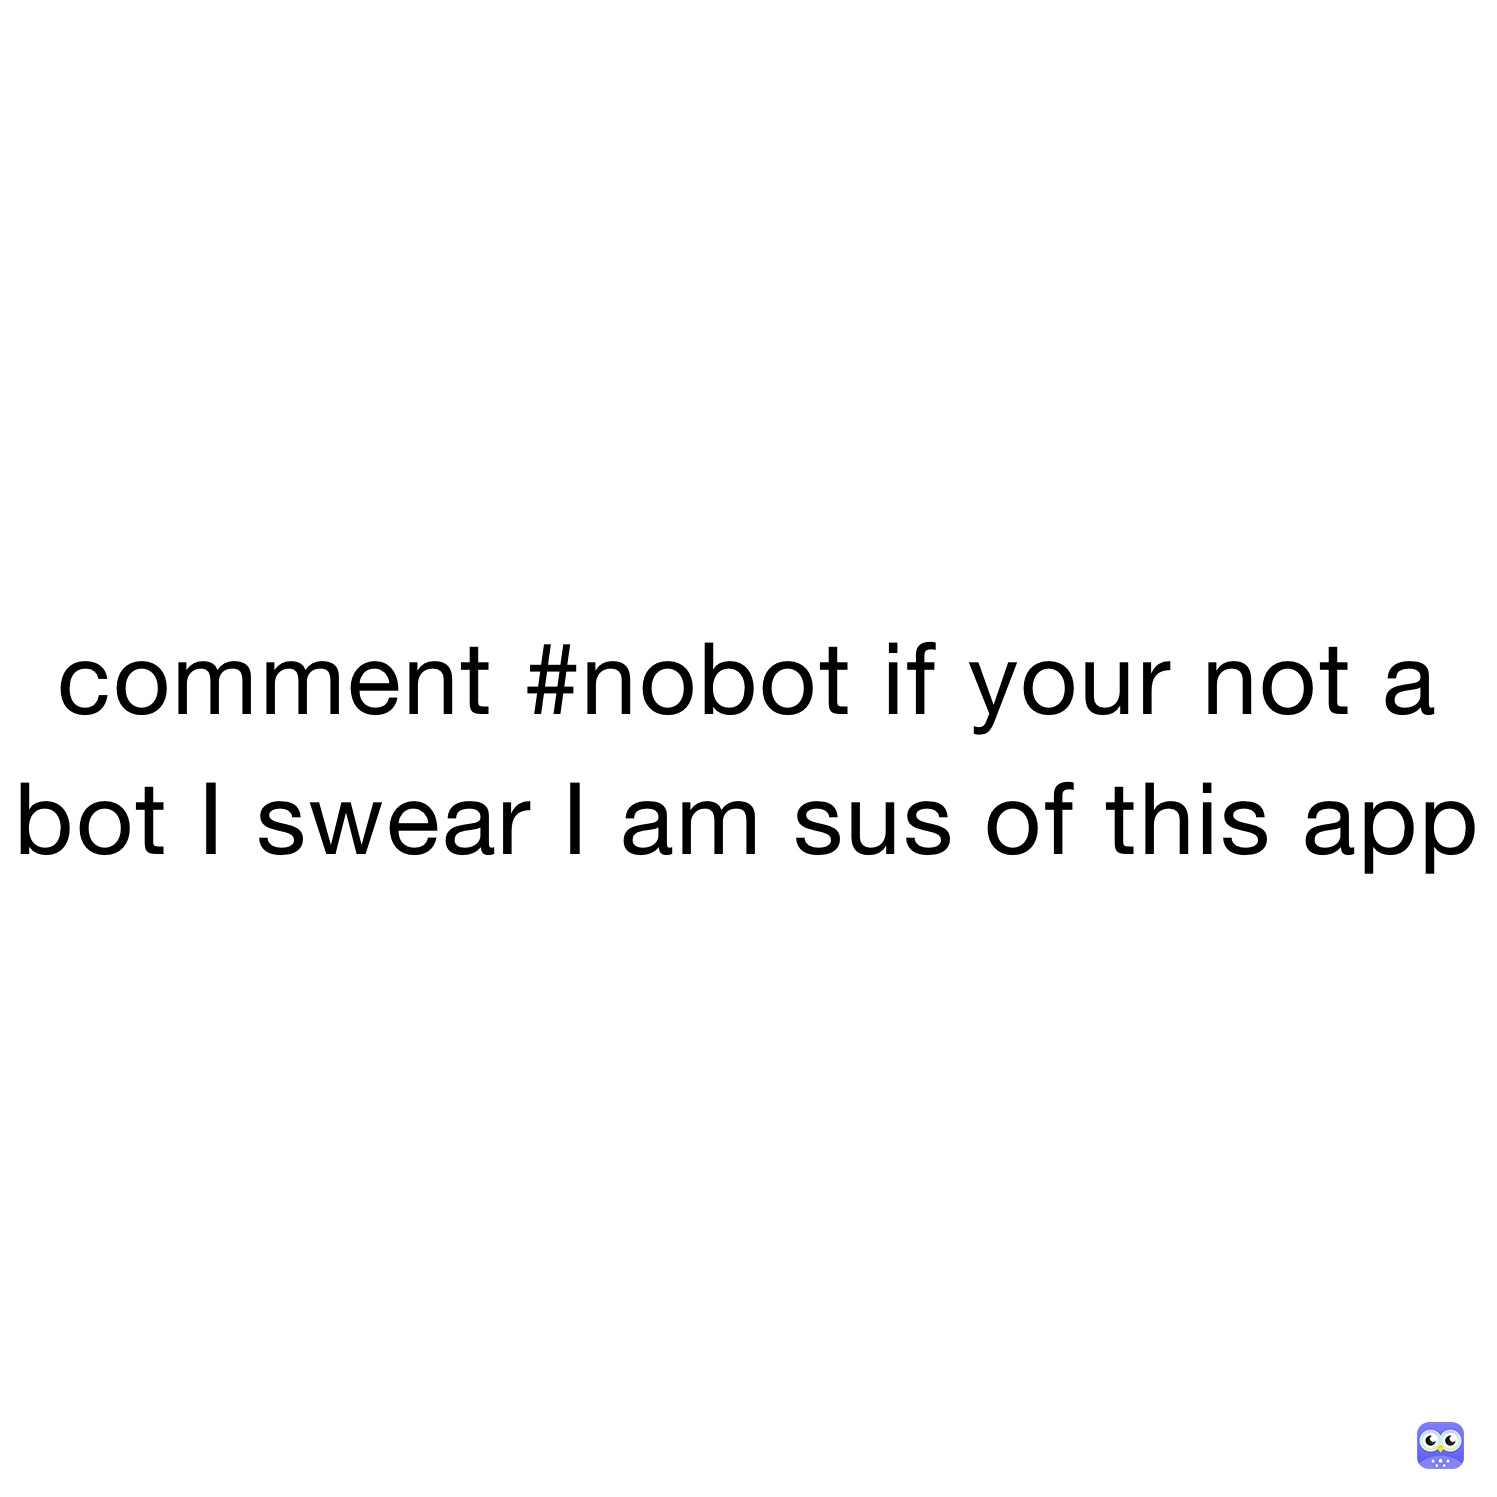 comment #nobot if your not a bot I swear I am sus of this app